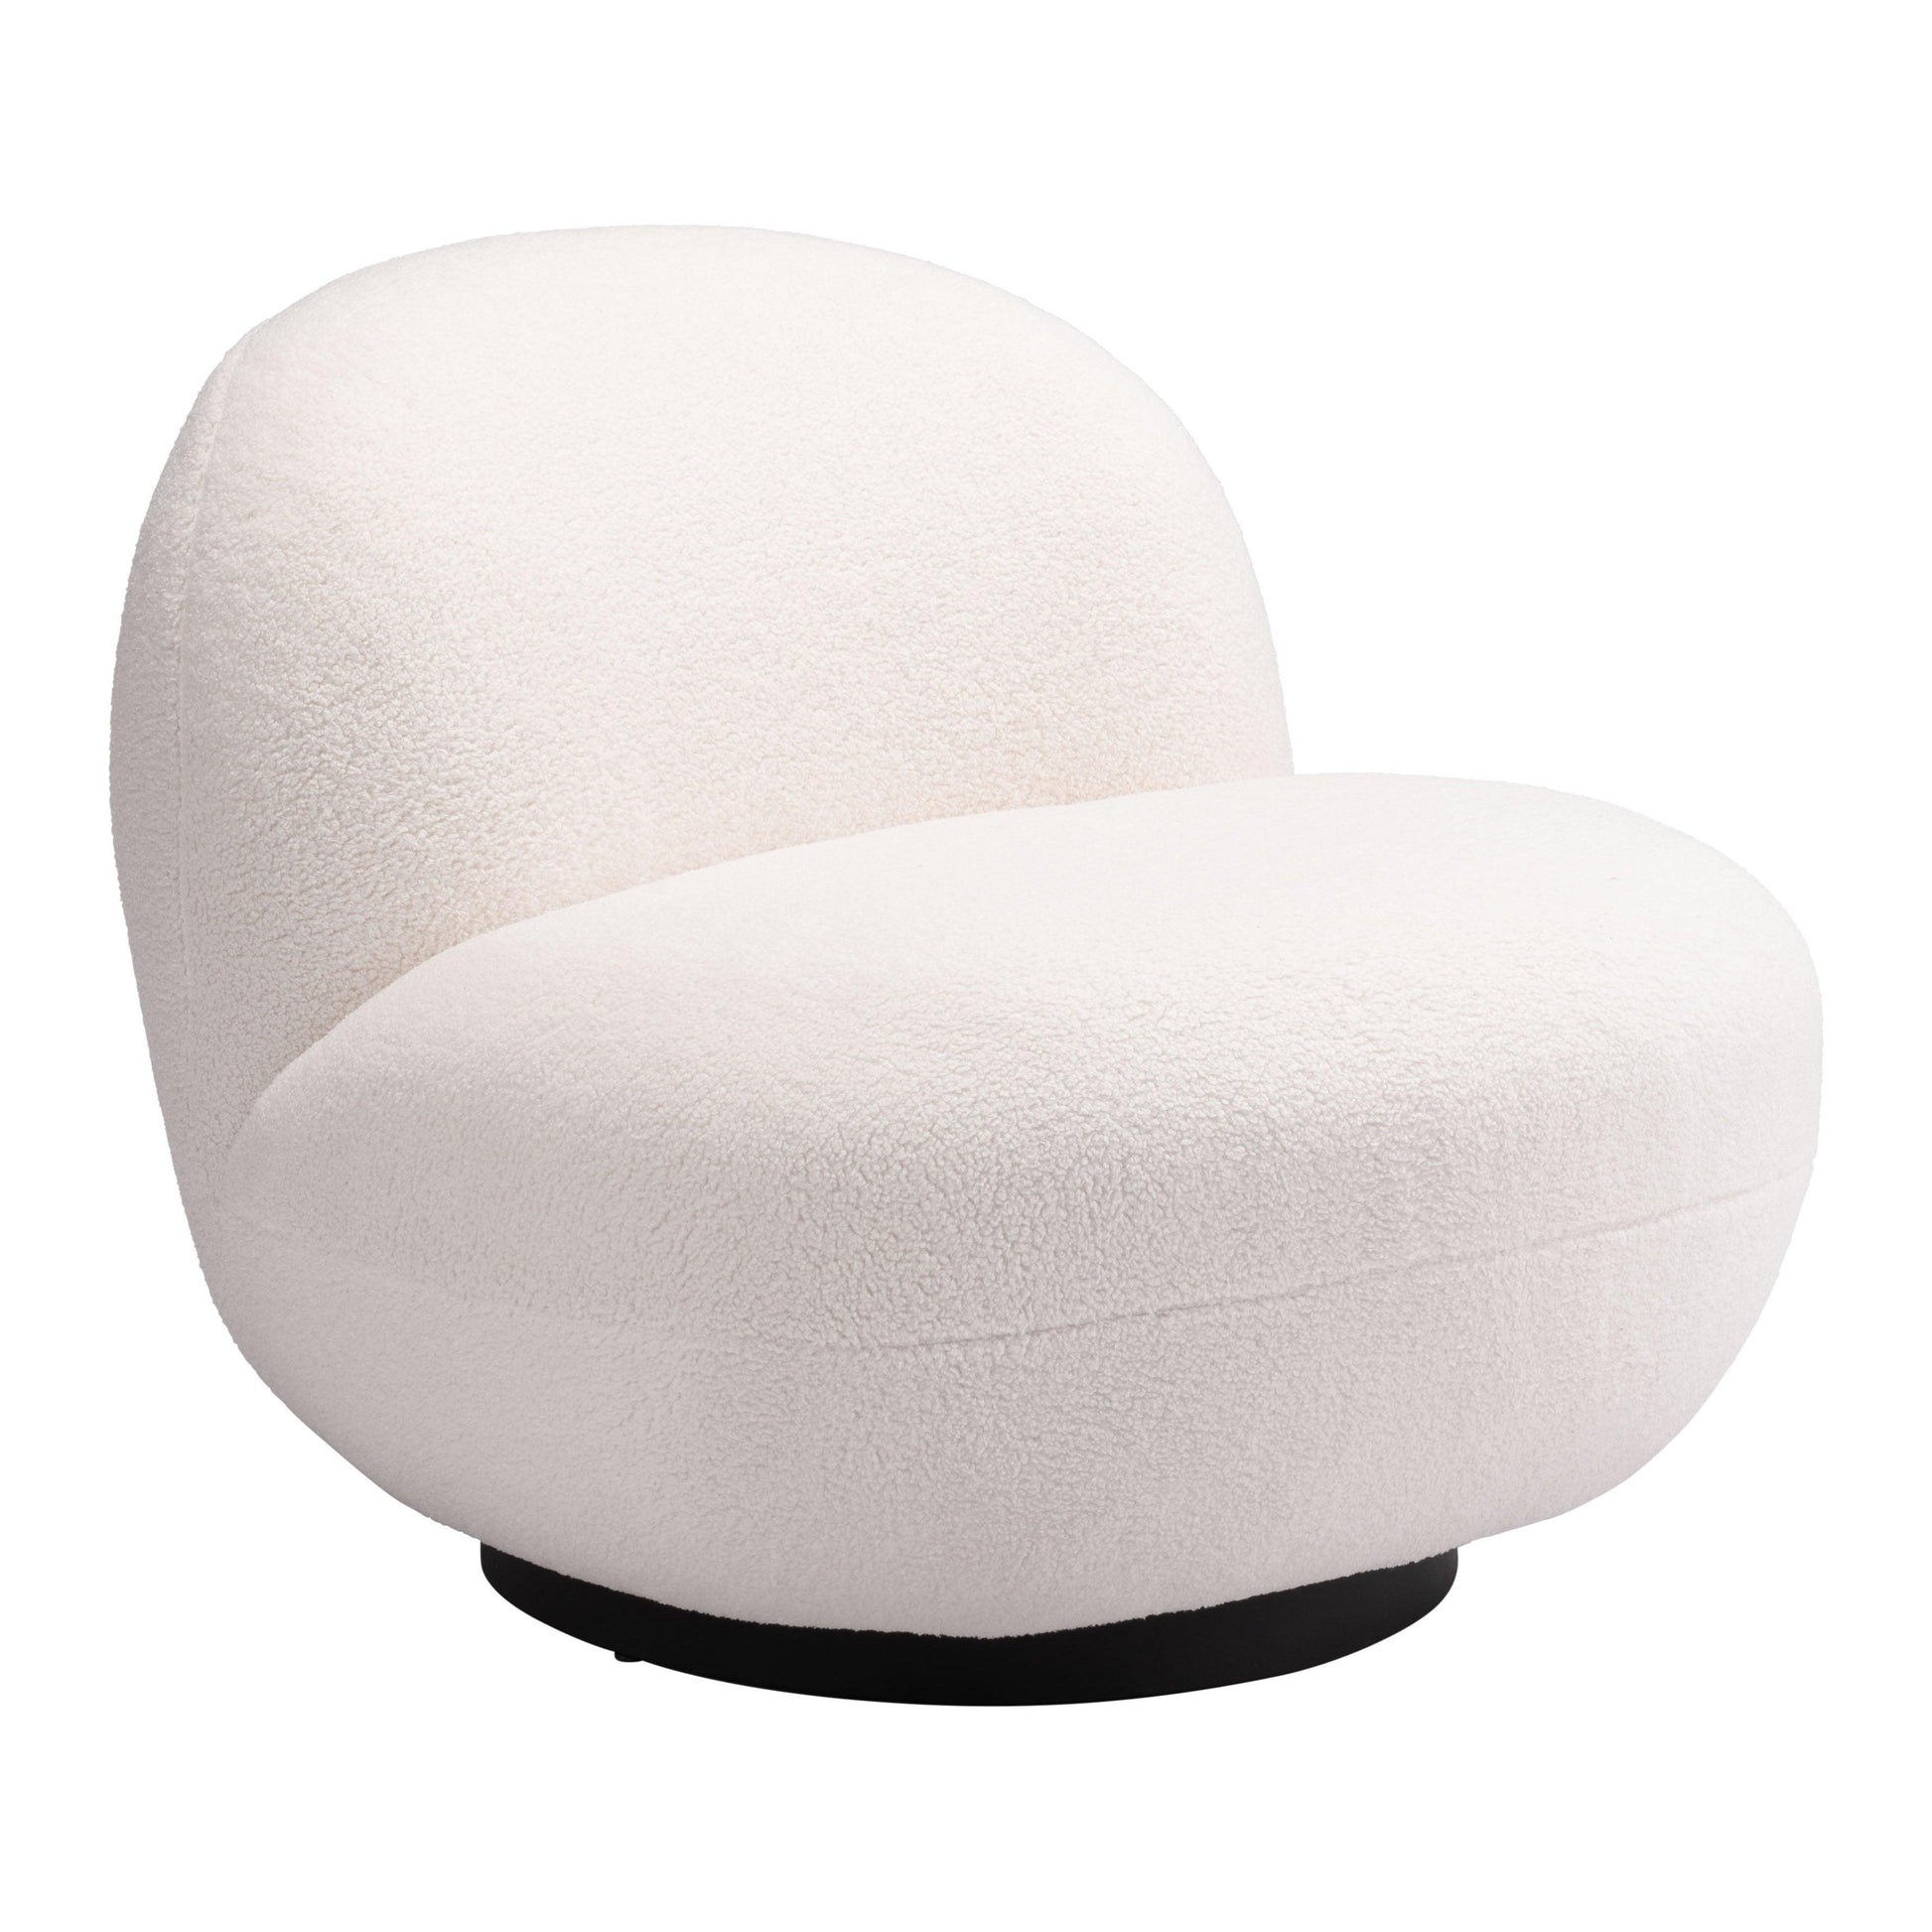 Myanmar Accent Chair Cream - Sideboards and Things Brand_Zuo Modern, Color_Black, Color_White, Features_Swivel, Finish_Powder Coated, Materials_Metal, Materials_Wood, Metal Type_Steel, Product Type_Occasional Chair, Upholstery Type_Fabric Blend, Upholstery Type_Polyester, Wood Species_Plywood